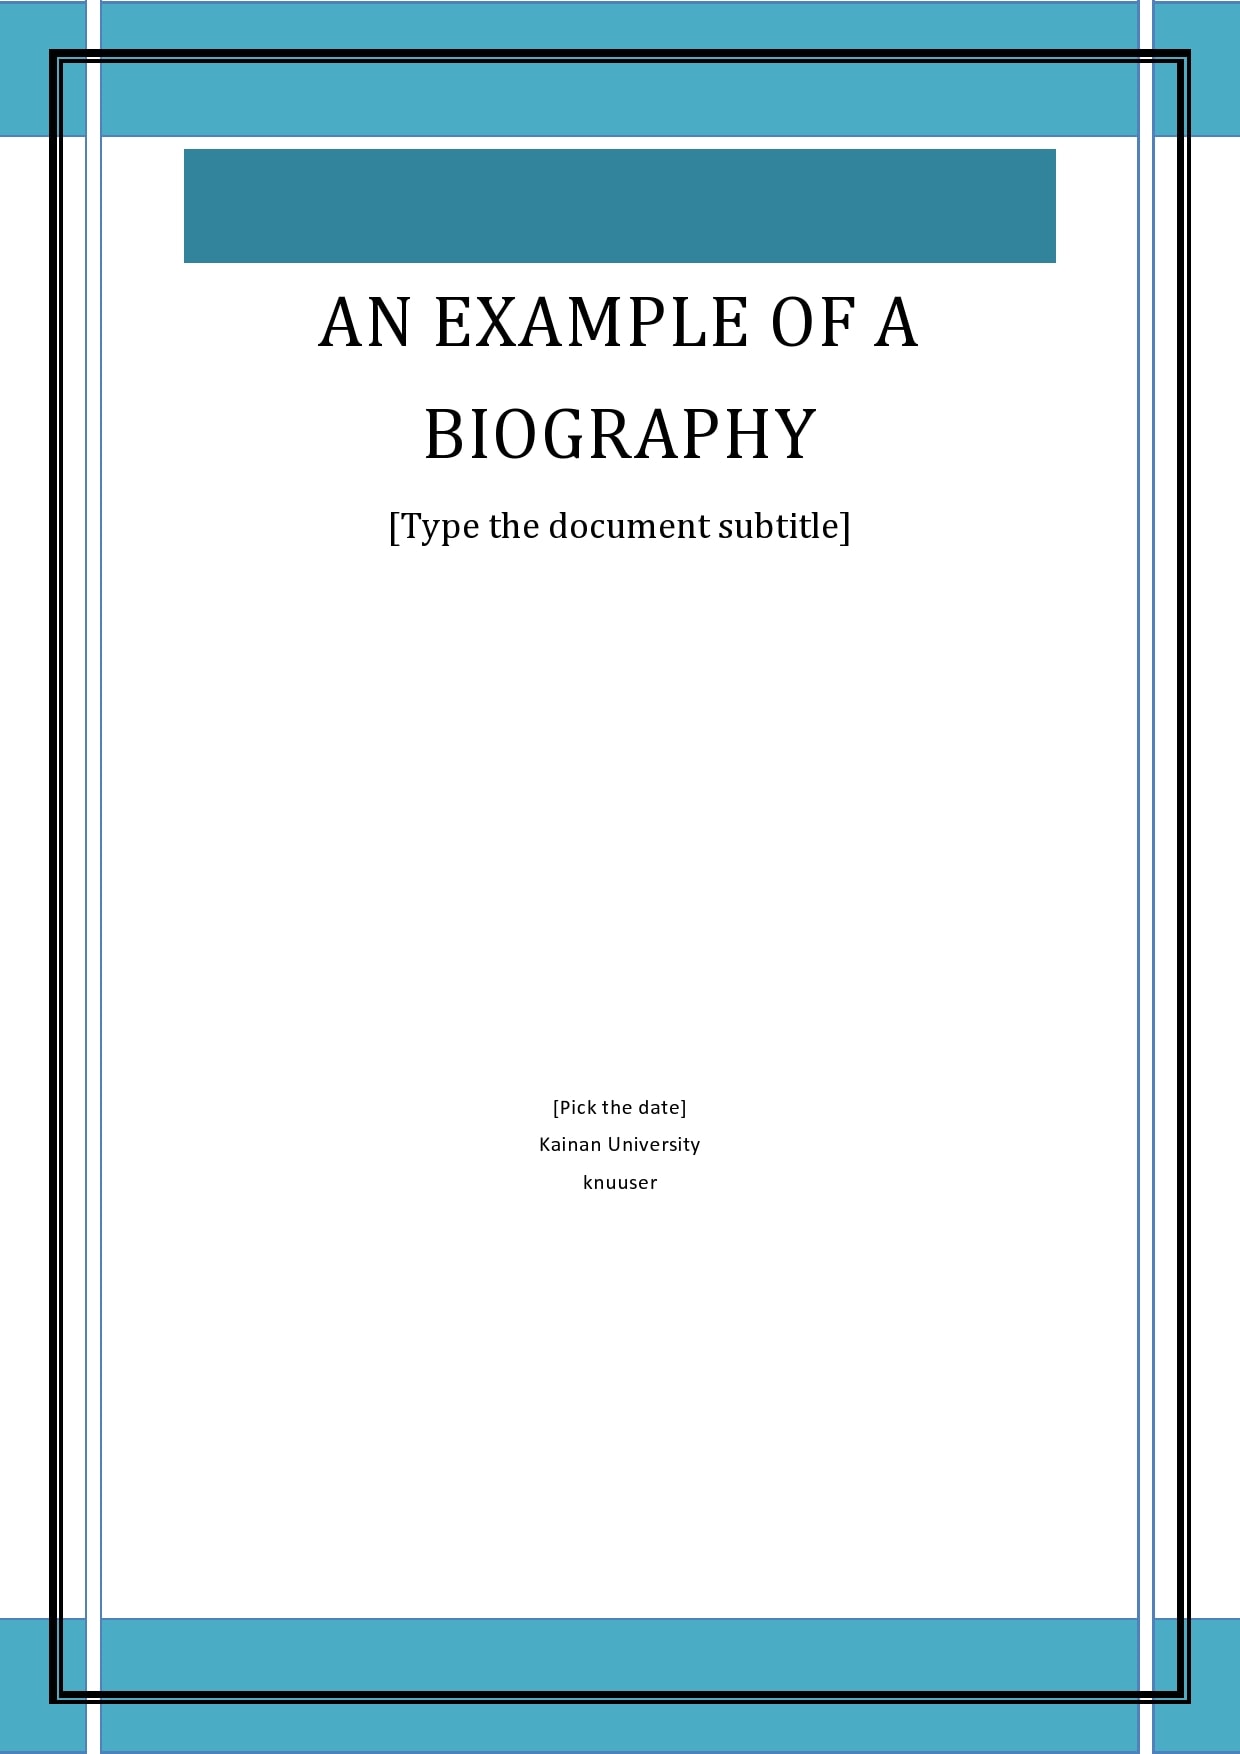 what does professional biography compiled mean